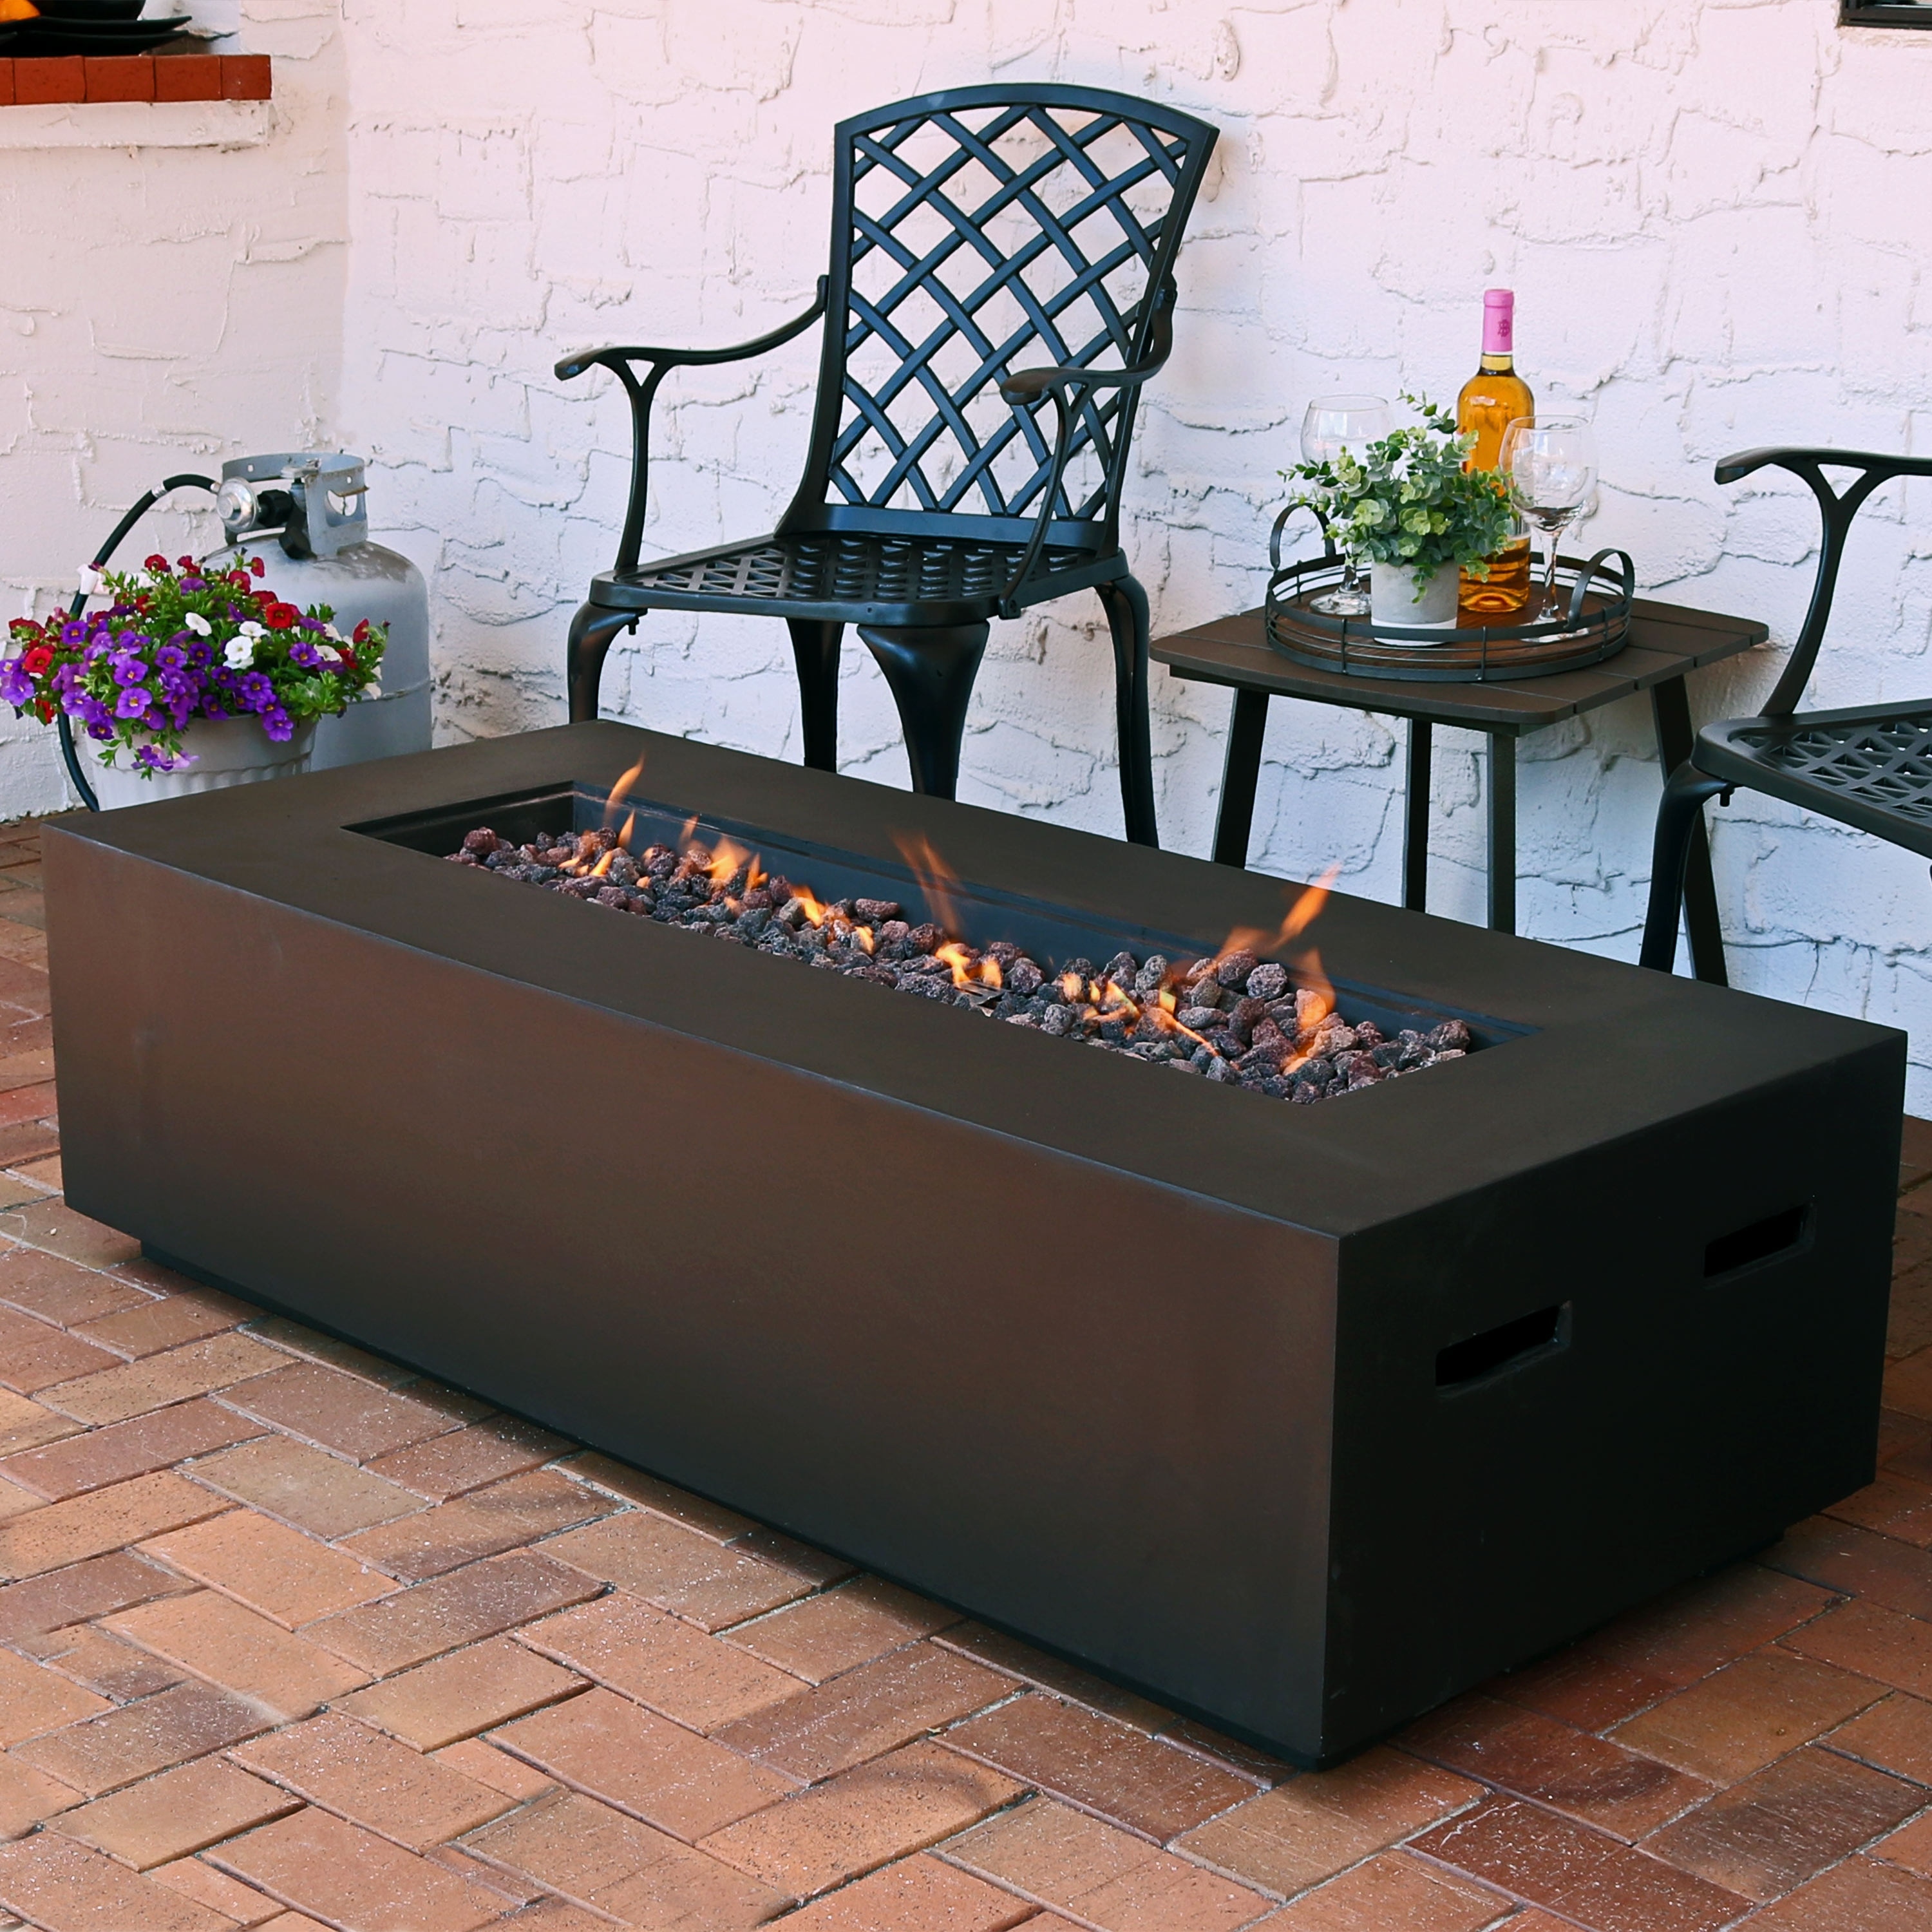 https://ak1.ostkcdn.com/images/products/is/images/direct/4659ce619641fcdba6be2899251e26b33fd6a1cb/Sunnydaze-Brown-LP-Gas-Modern-Fire-Pit-Coffee-Table-with-Lava-Rocks---56-Inch.jpg